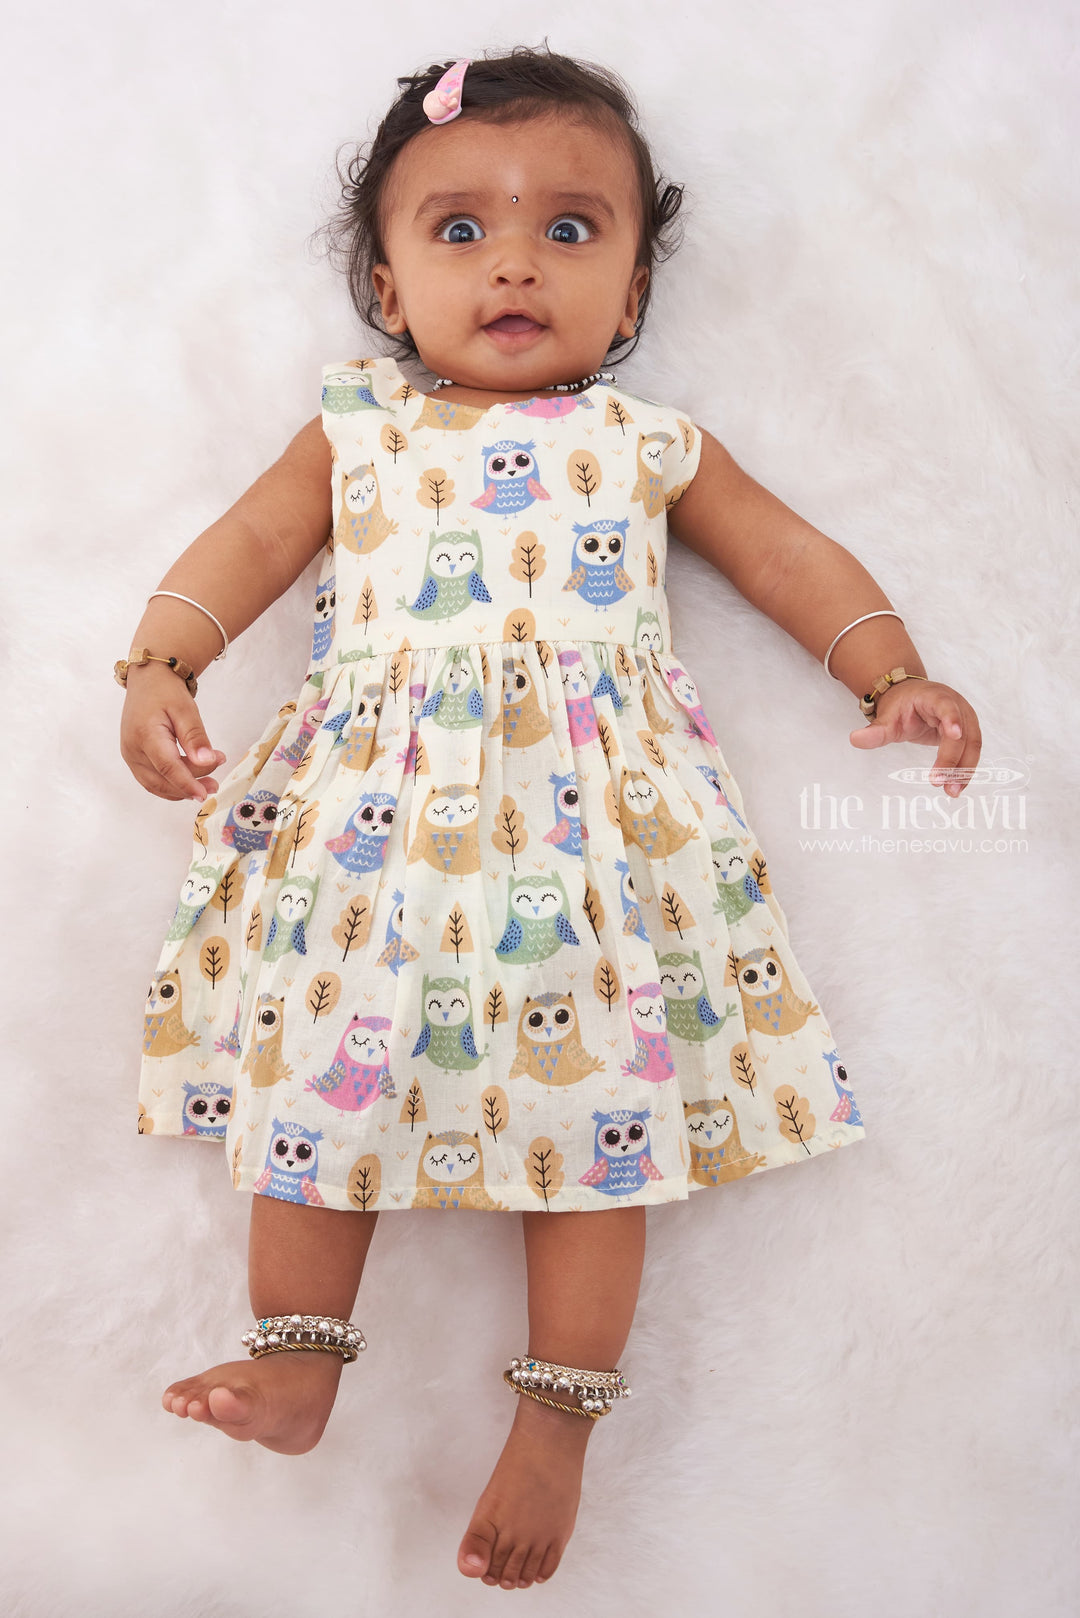 The Nesavu Baby Cotton Frocks Owl Whimsy: Playful Owl-Printed Baby Cotton Frock Nesavu 12 (3M) / White / Cotton BFJ488A-12 Organic Cotton Baby Dresses | Soft and Cute Outfits for Newborn Girls | The Nesavu